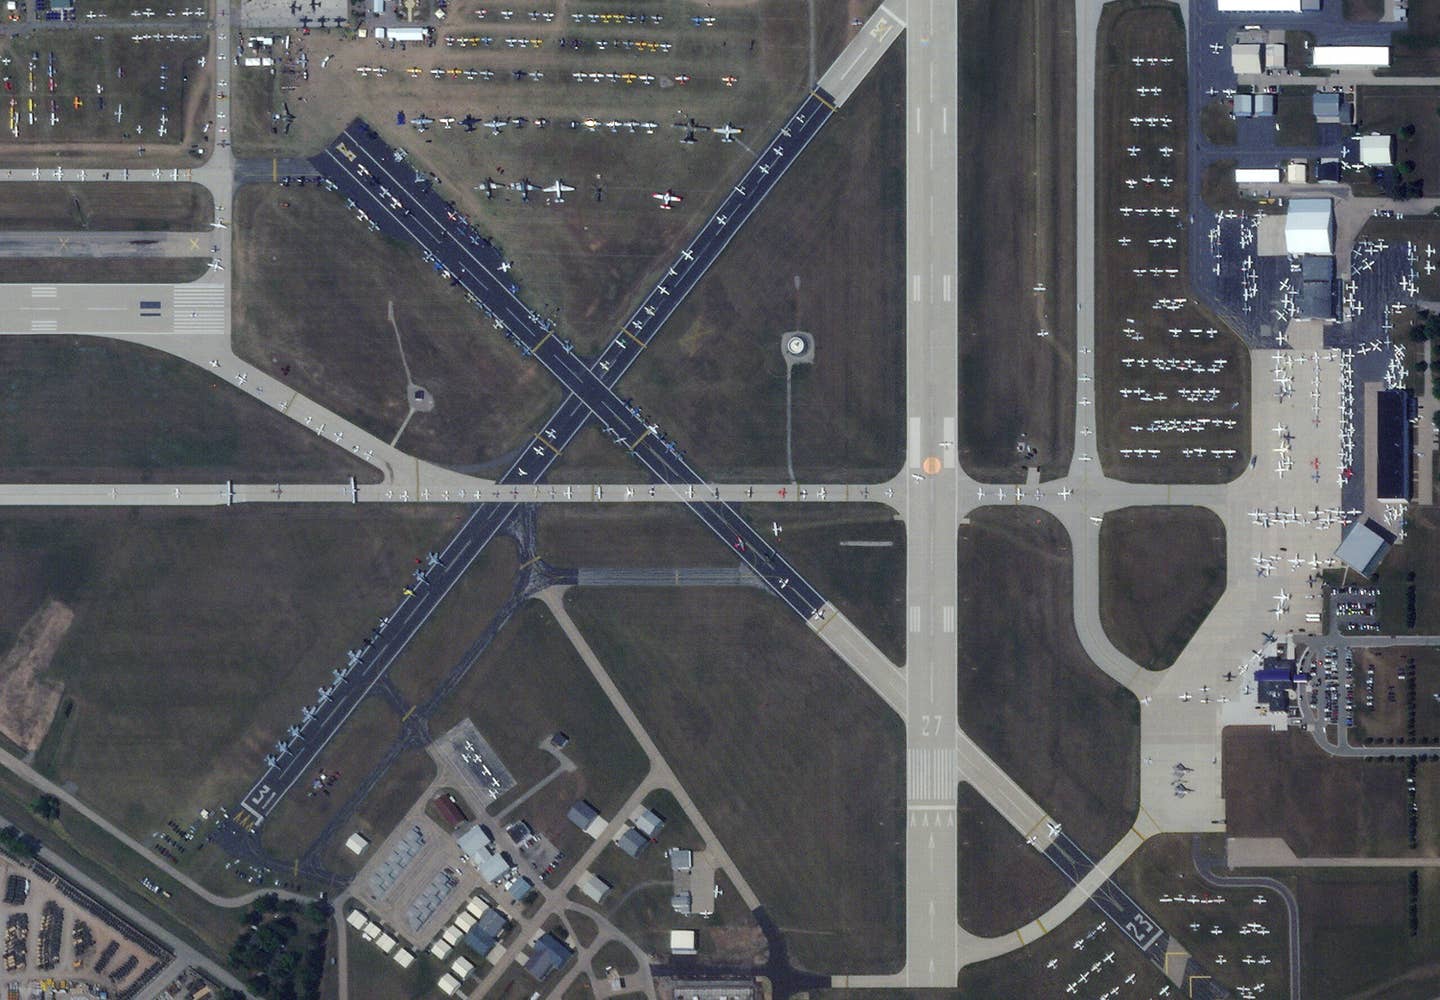 One end of the small cross runways turned into a hot pit area for tactical jets that would fly during the week. The F-22 demo team can be seen parked across the runway on another apron. Many of the jet warbirds are parked on the top left runway area. (<em>PHOTO © 2023 PLANET LABS INC. ALL RIGHTS RESERVED. REPRINTED BY PERMISSION</em>)